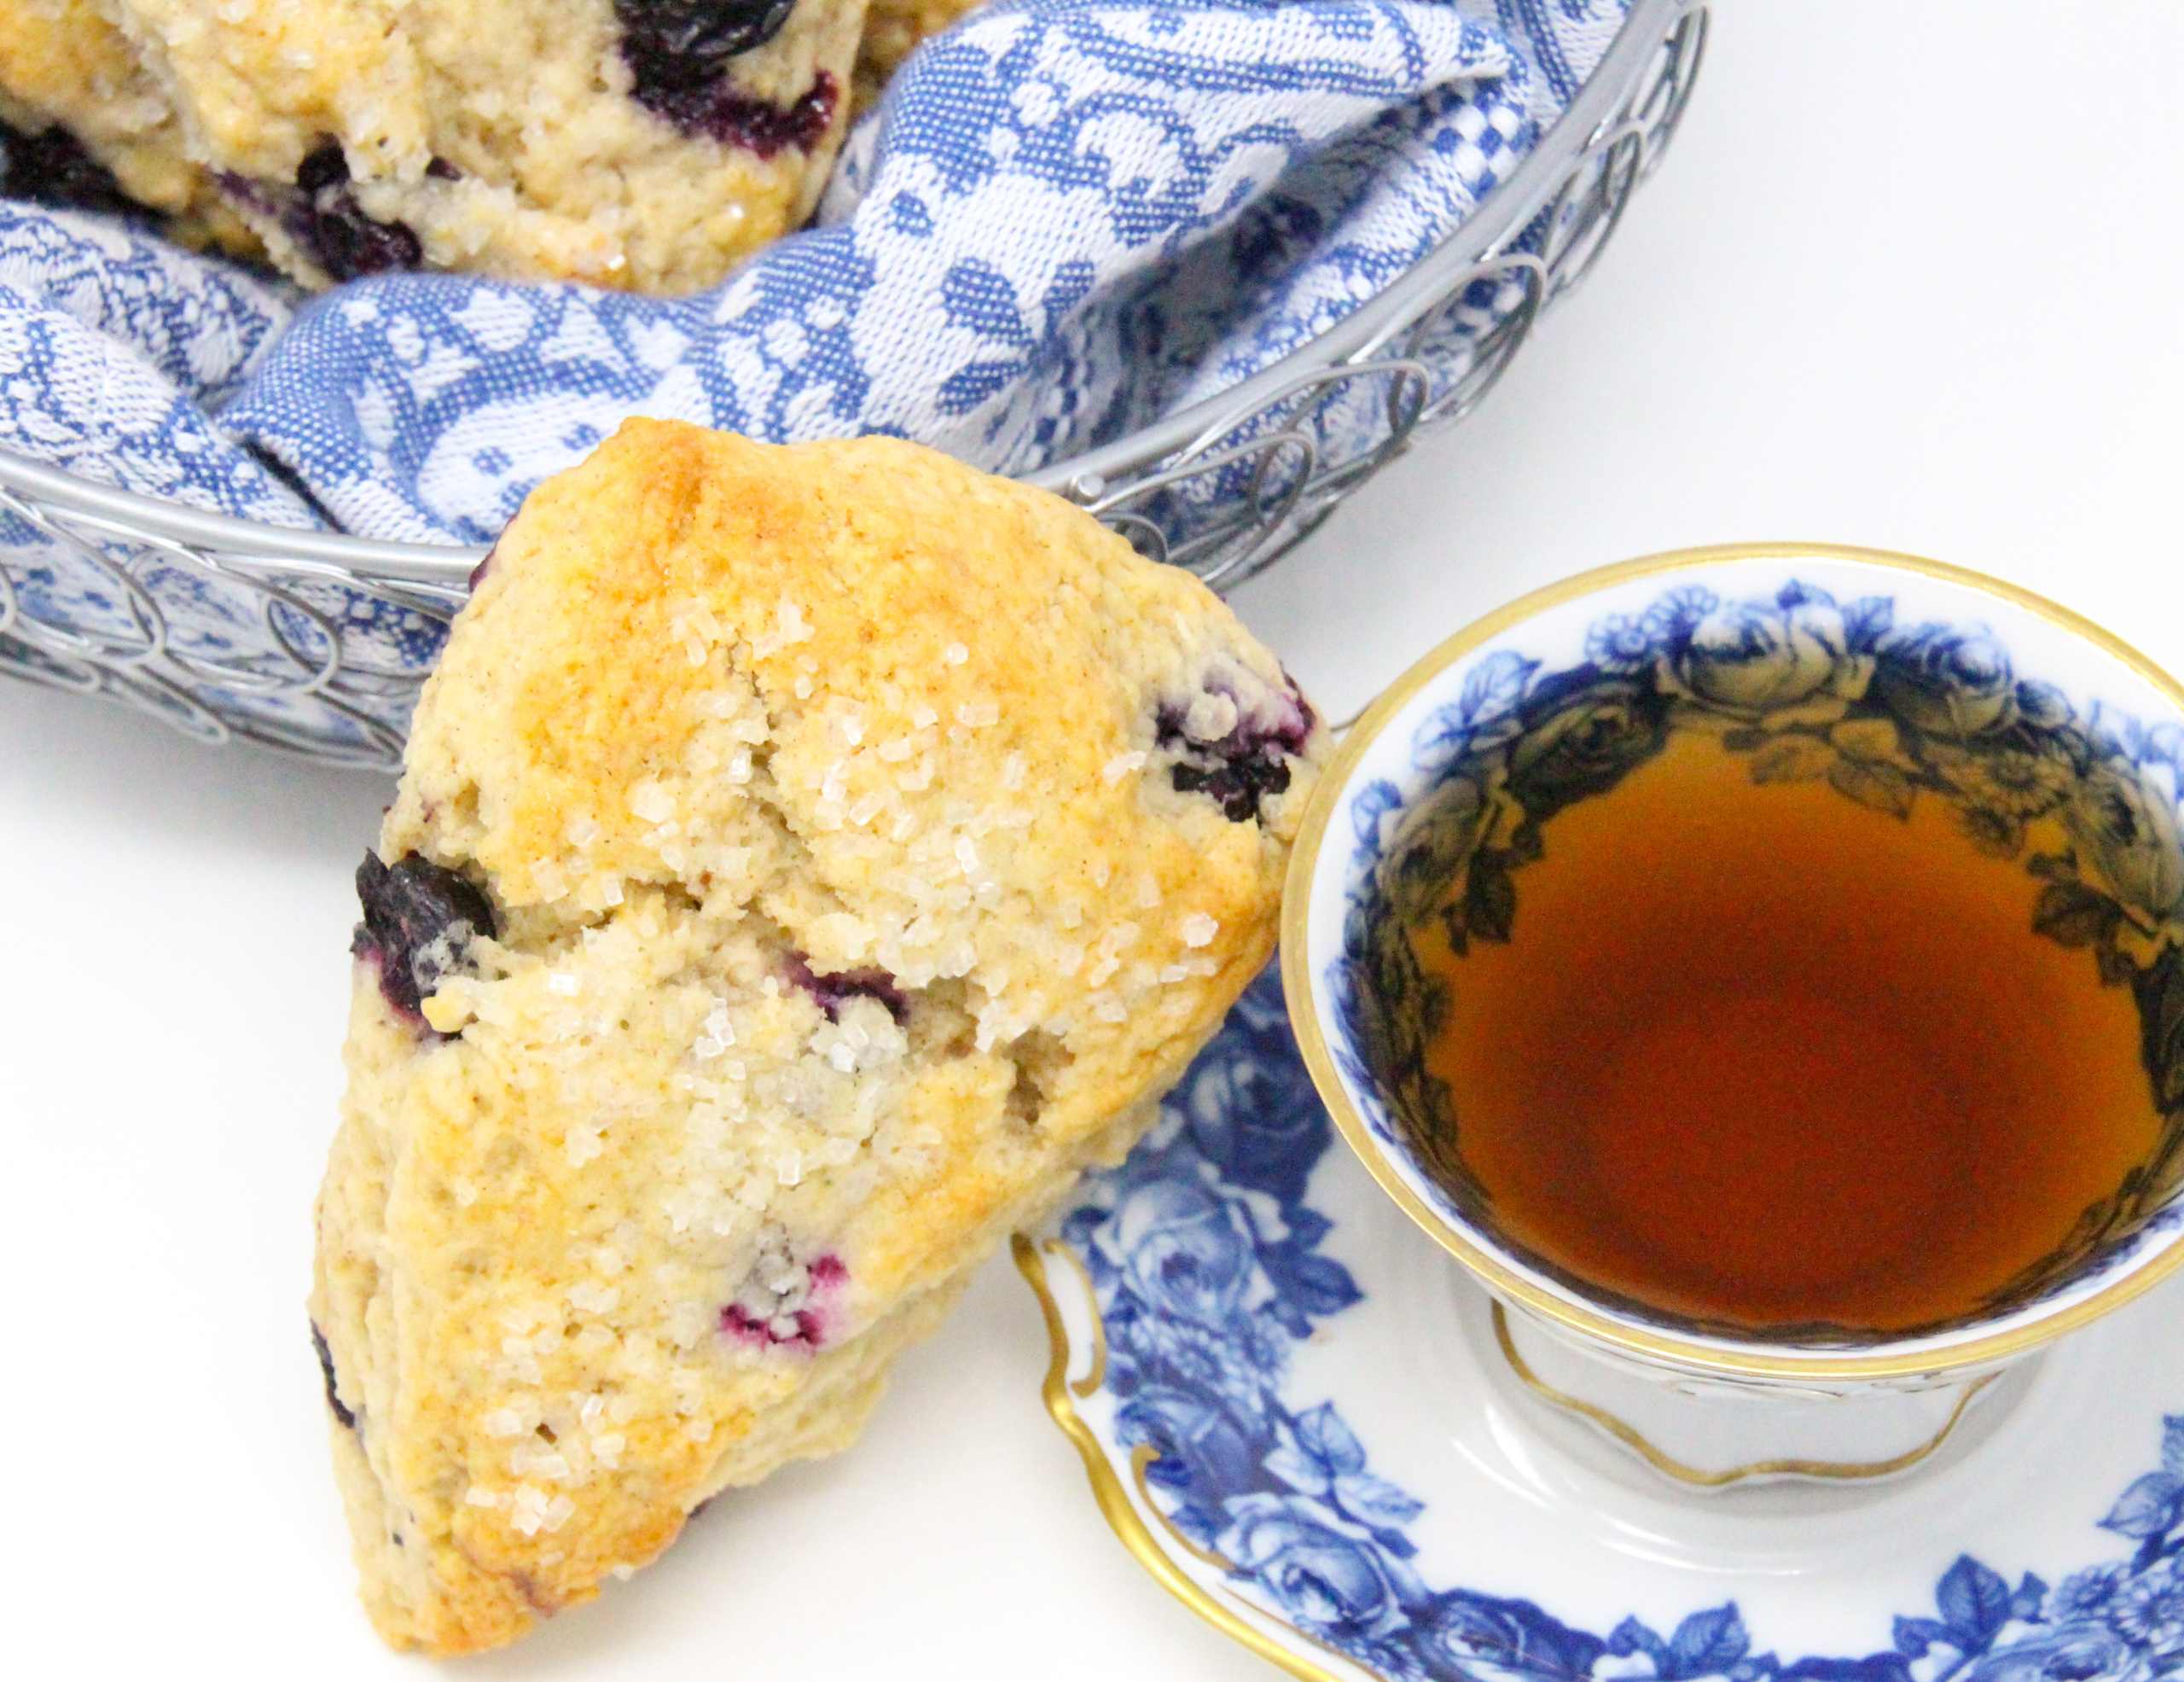 Flaky, rich, and with the yummy sweetness of the blueberries, these Blueberry Scones can be made year-round thanks to being able to use either fresh or frozen blueberries, depending on the season. Recipe shared with permission granted by Maddie Day, author of MURDER IN A CAPE COTTAGE. 